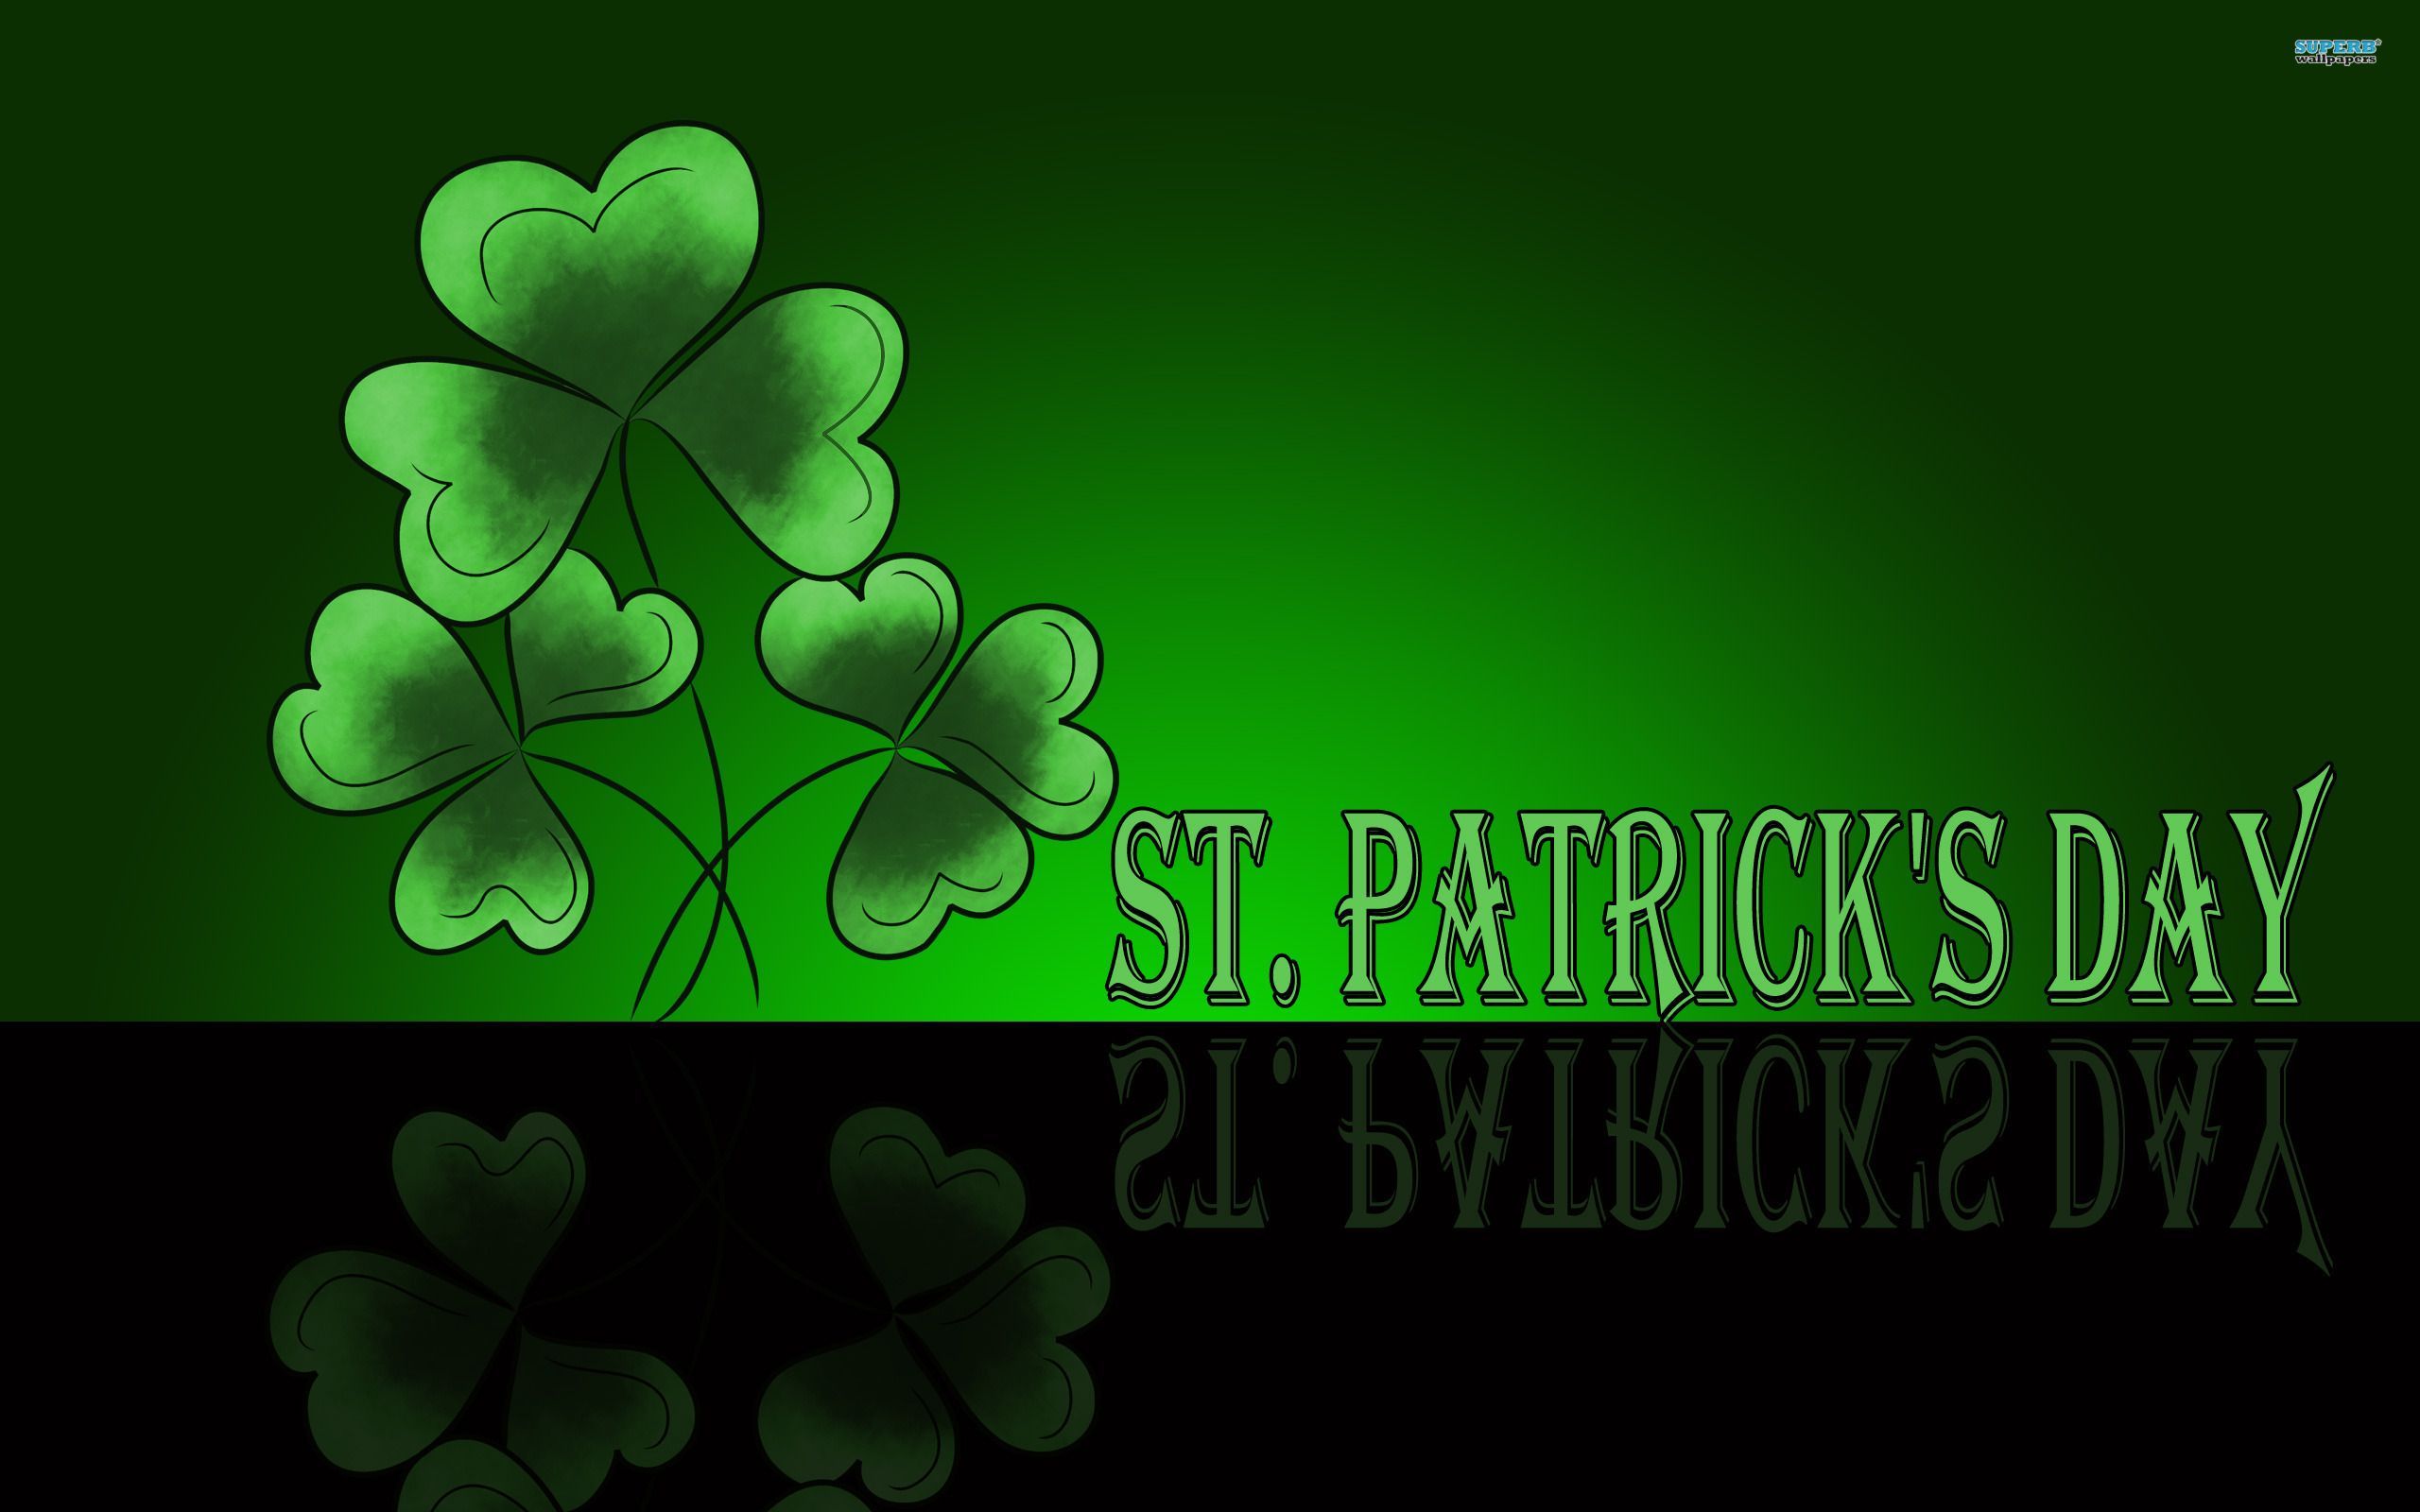 St Patrick's Day Wallpaper, Background for My PC, Desktop